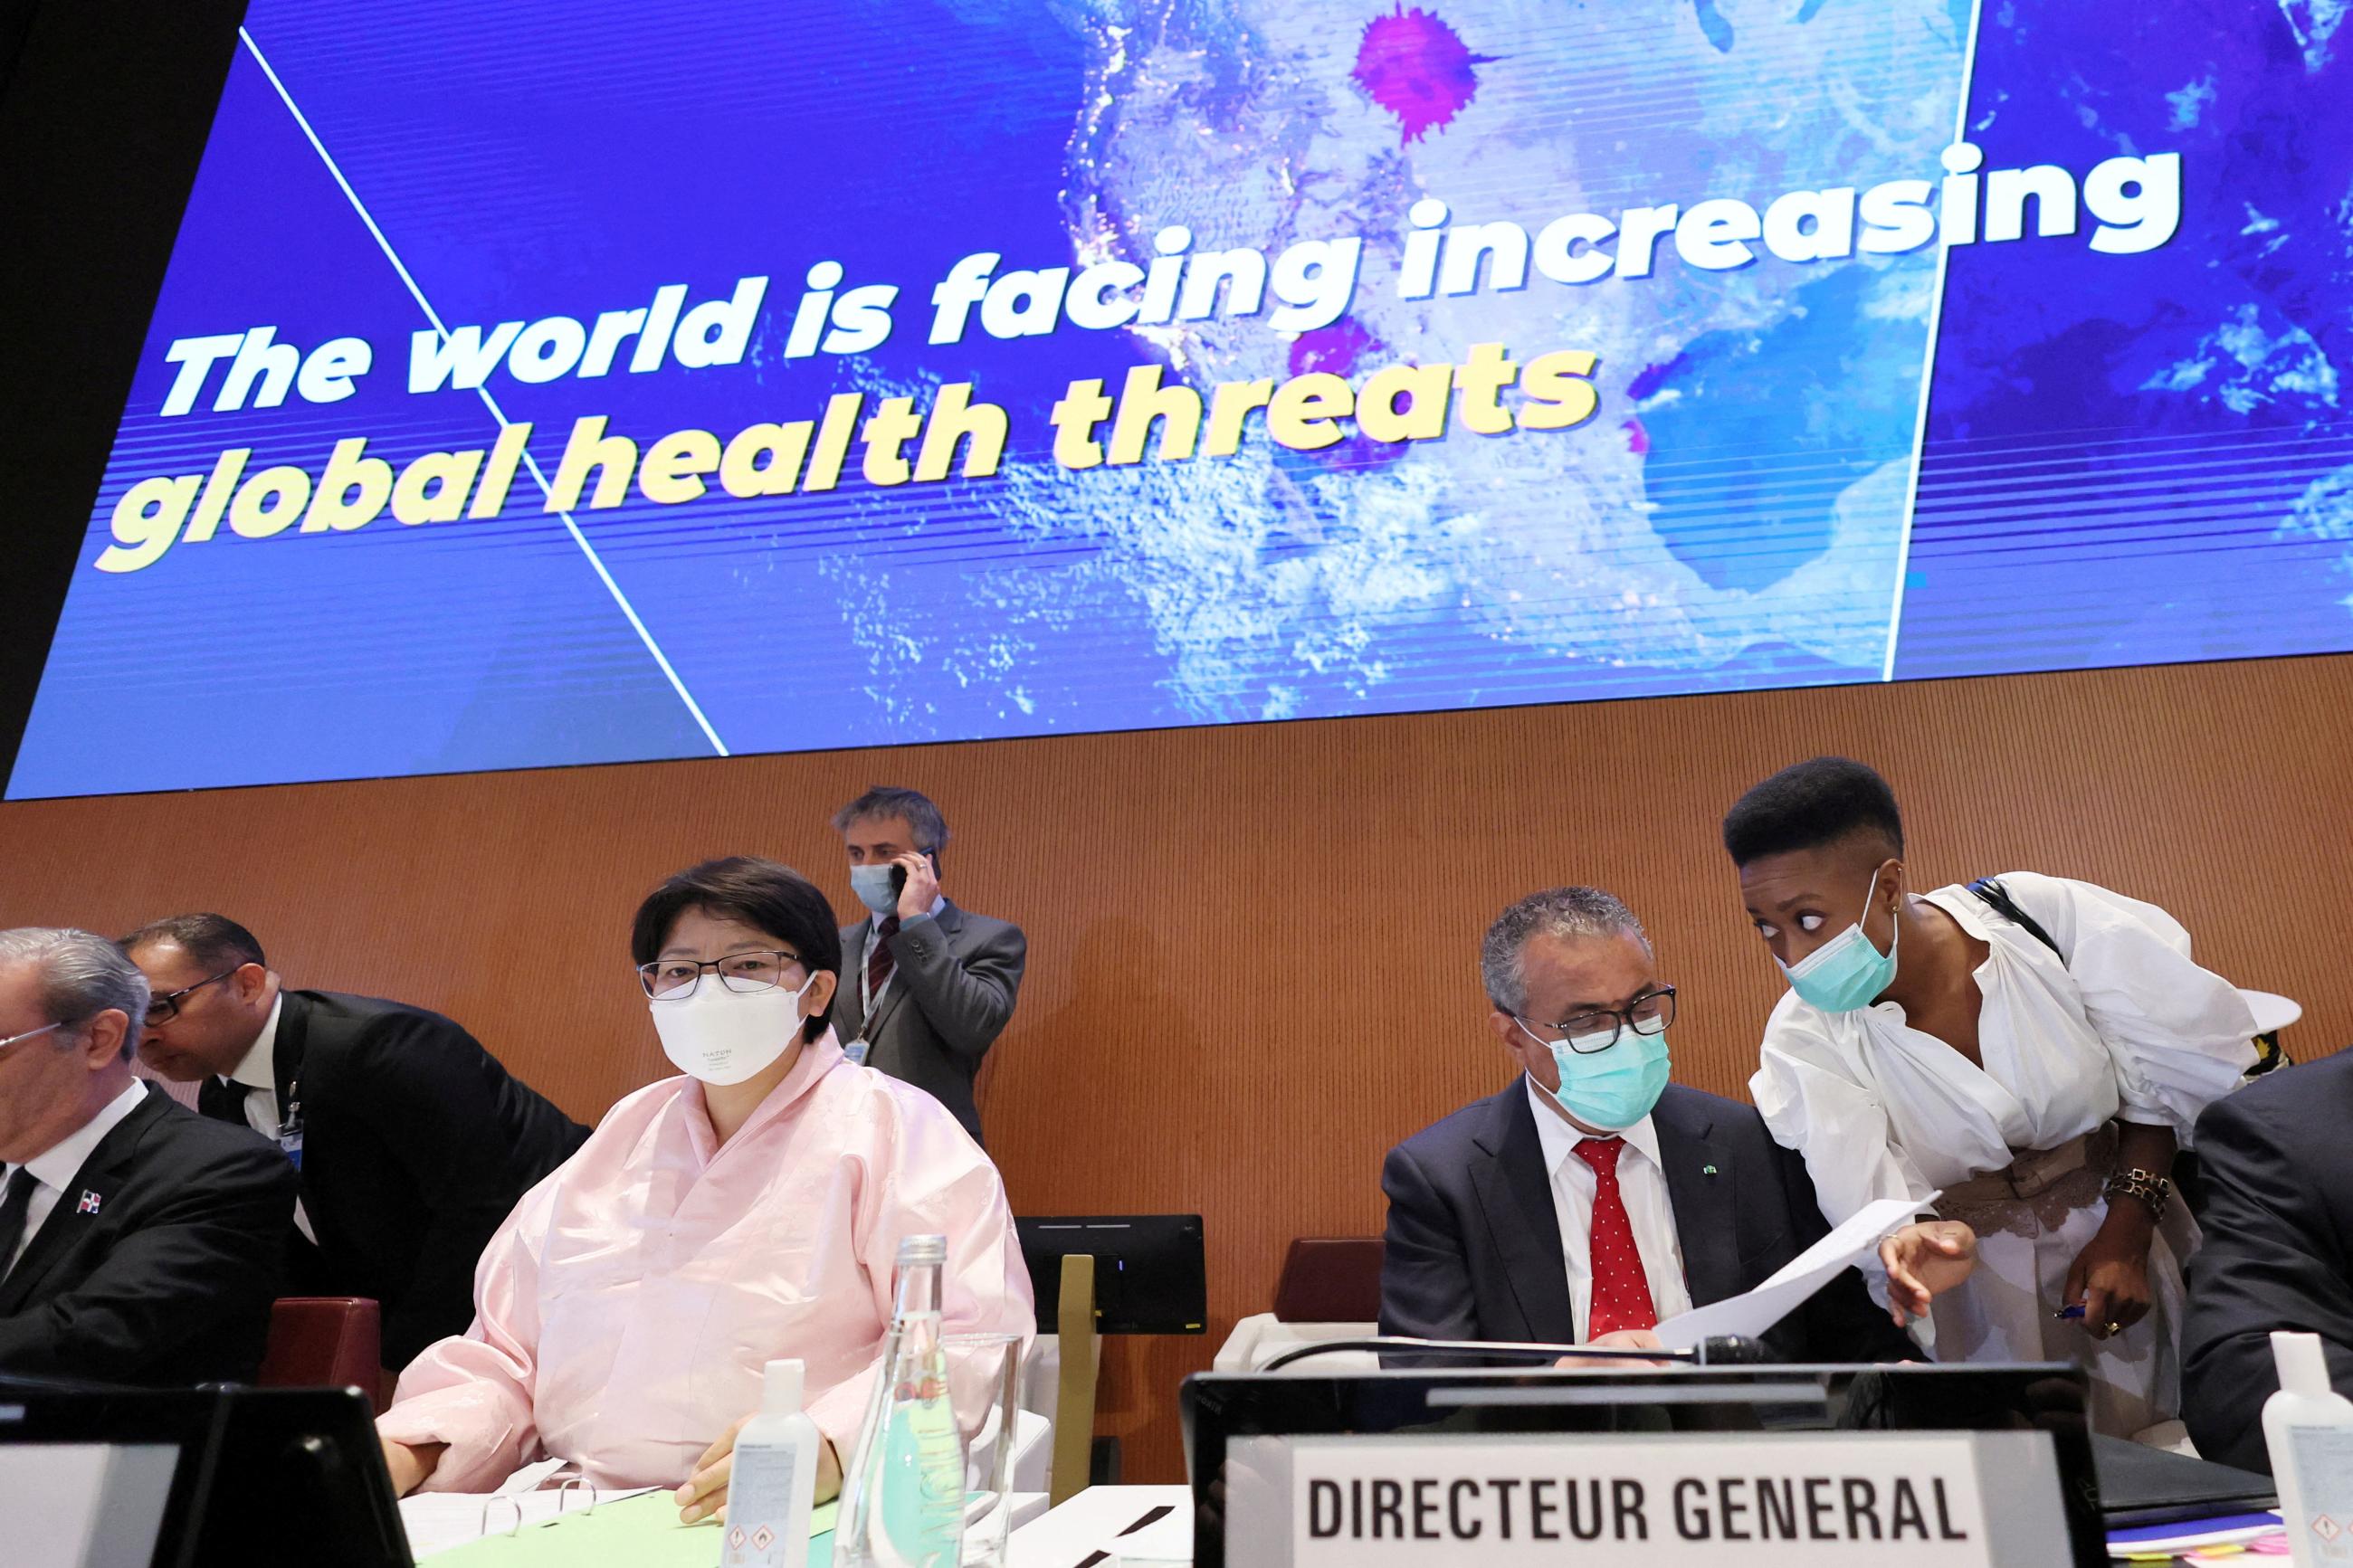 Dr. Tedros Adhanom Ghebreyesus is photographed sitting behind a podium wearing a dark suit, white shirt, and red tie flipping through a newspaper at the 75th World health Assembly meeting